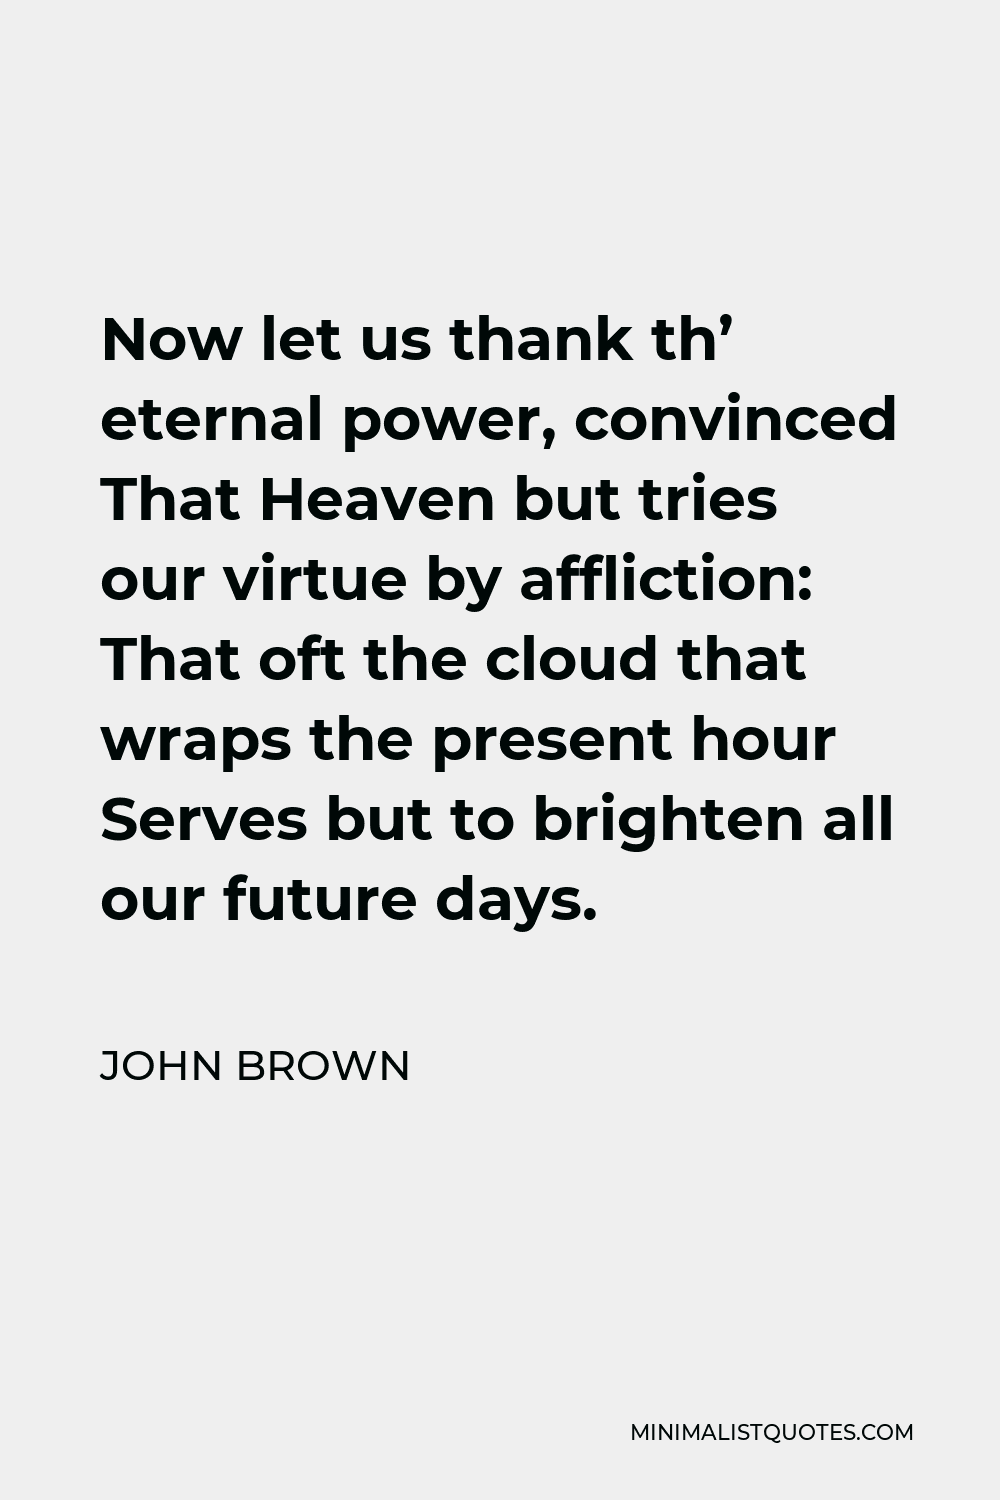 John Brown Quote - Now let us thank th’ eternal power, convinced That Heaven but tries our virtue by affliction: That oft the cloud that wraps the present hour Serves but to brighten all our future days.